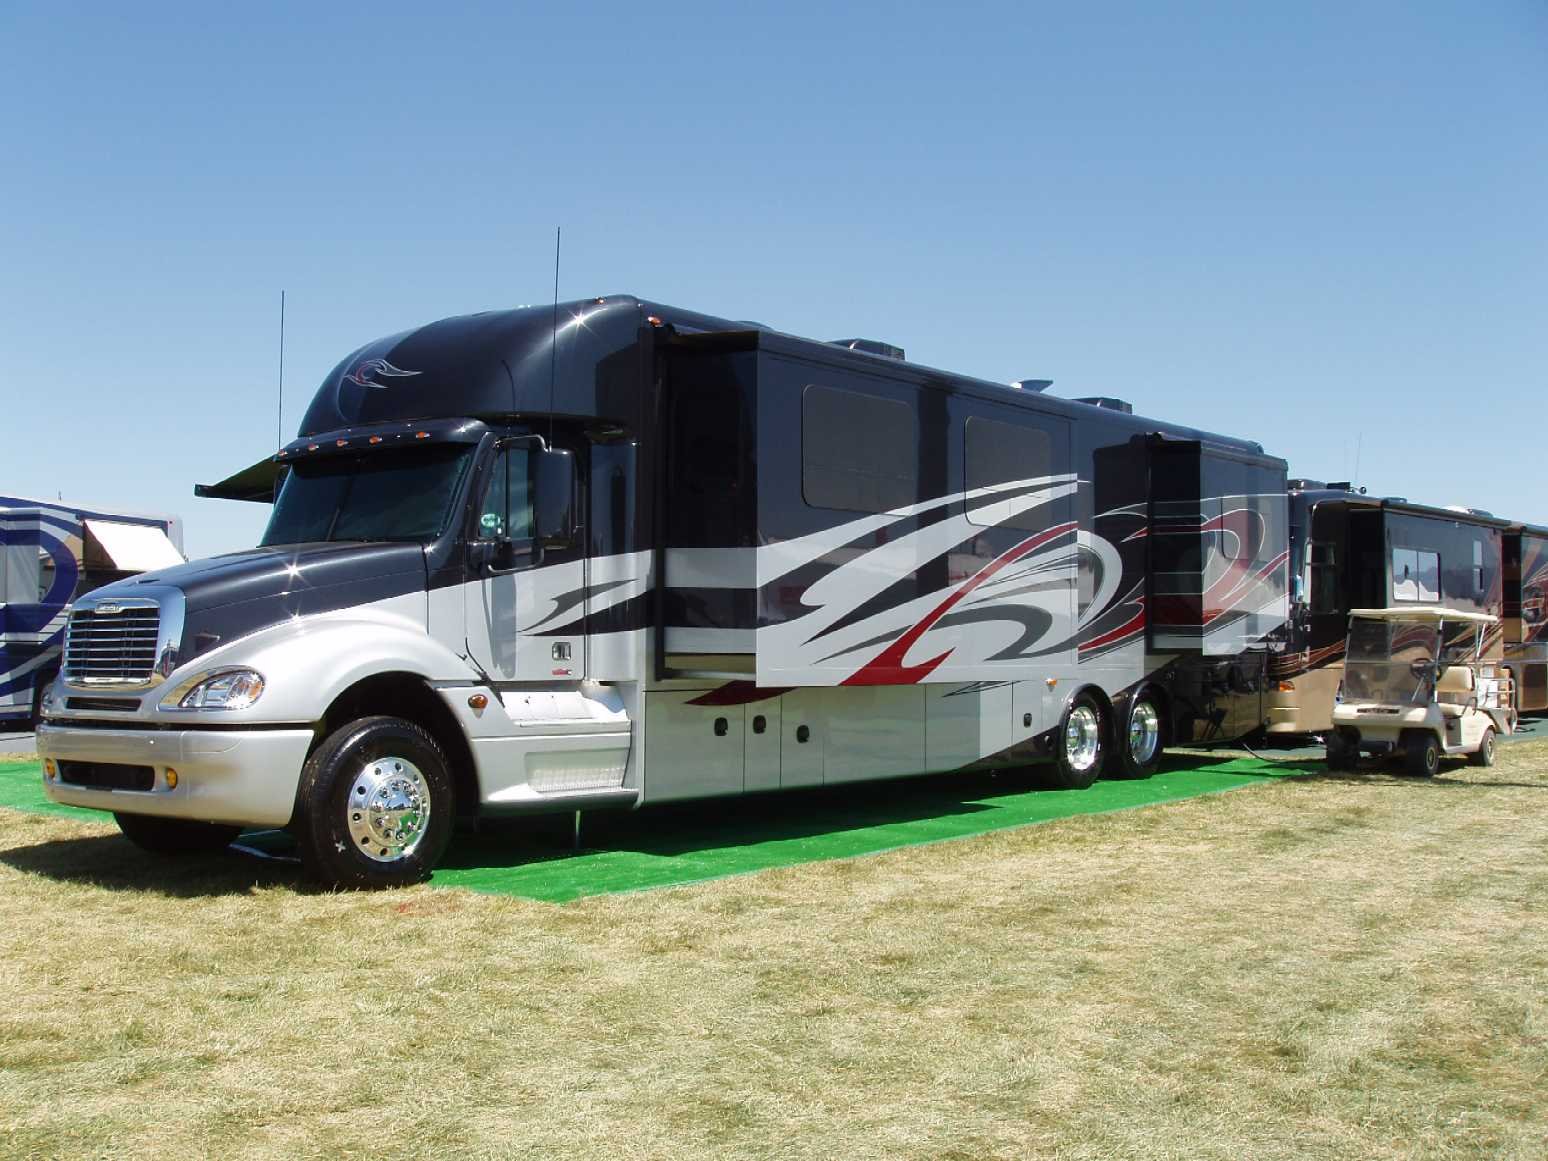 Great Photos Pics Of Customized Motorhomes Trailers Built For